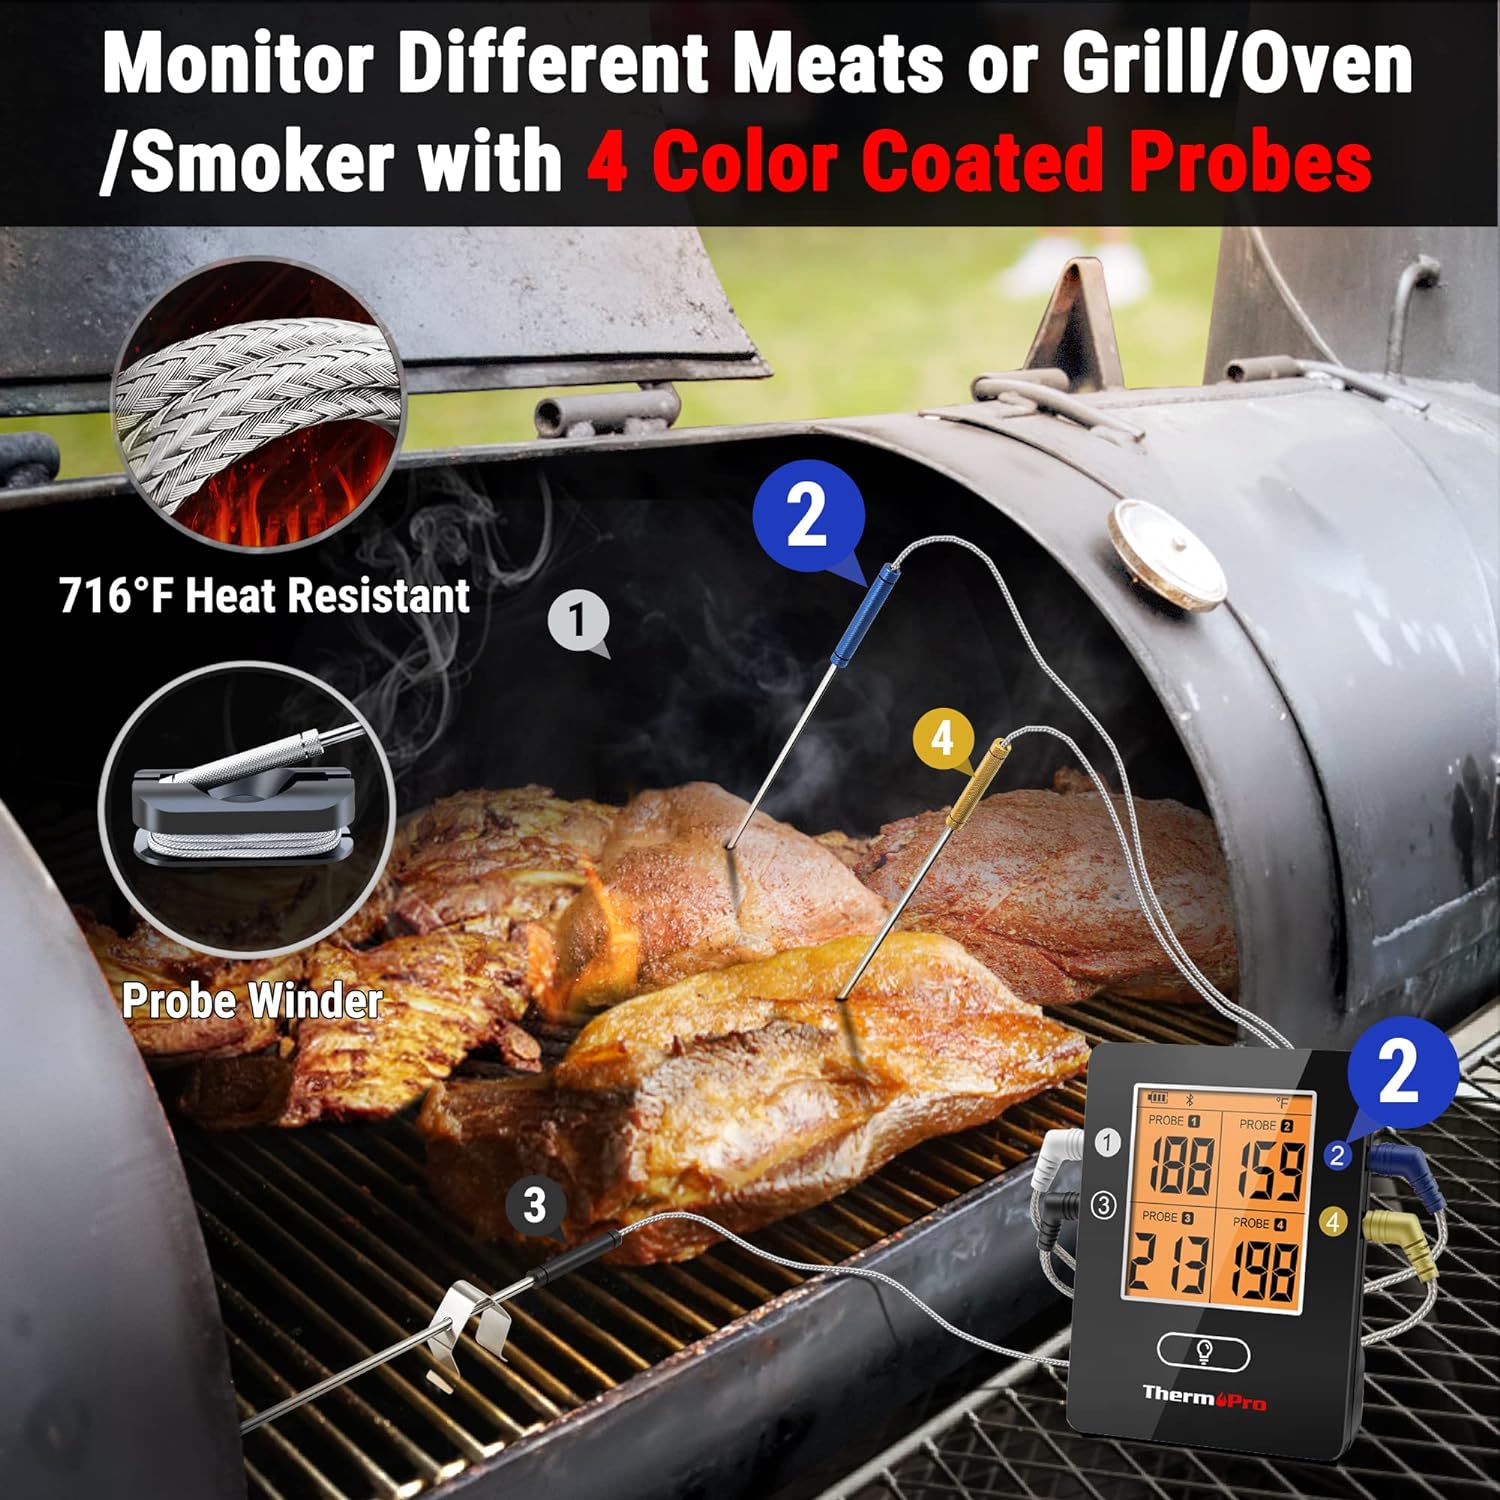 ThermoPro TP25 650FT Bluetooth Meat Thermometer with 4-Probes, Smart Rechargeable Wireless Meat Thermometer for Grilling, Smoker, Oven, Kitchen, BBQ Thermometer with Alarm, Temperature Graph, Black